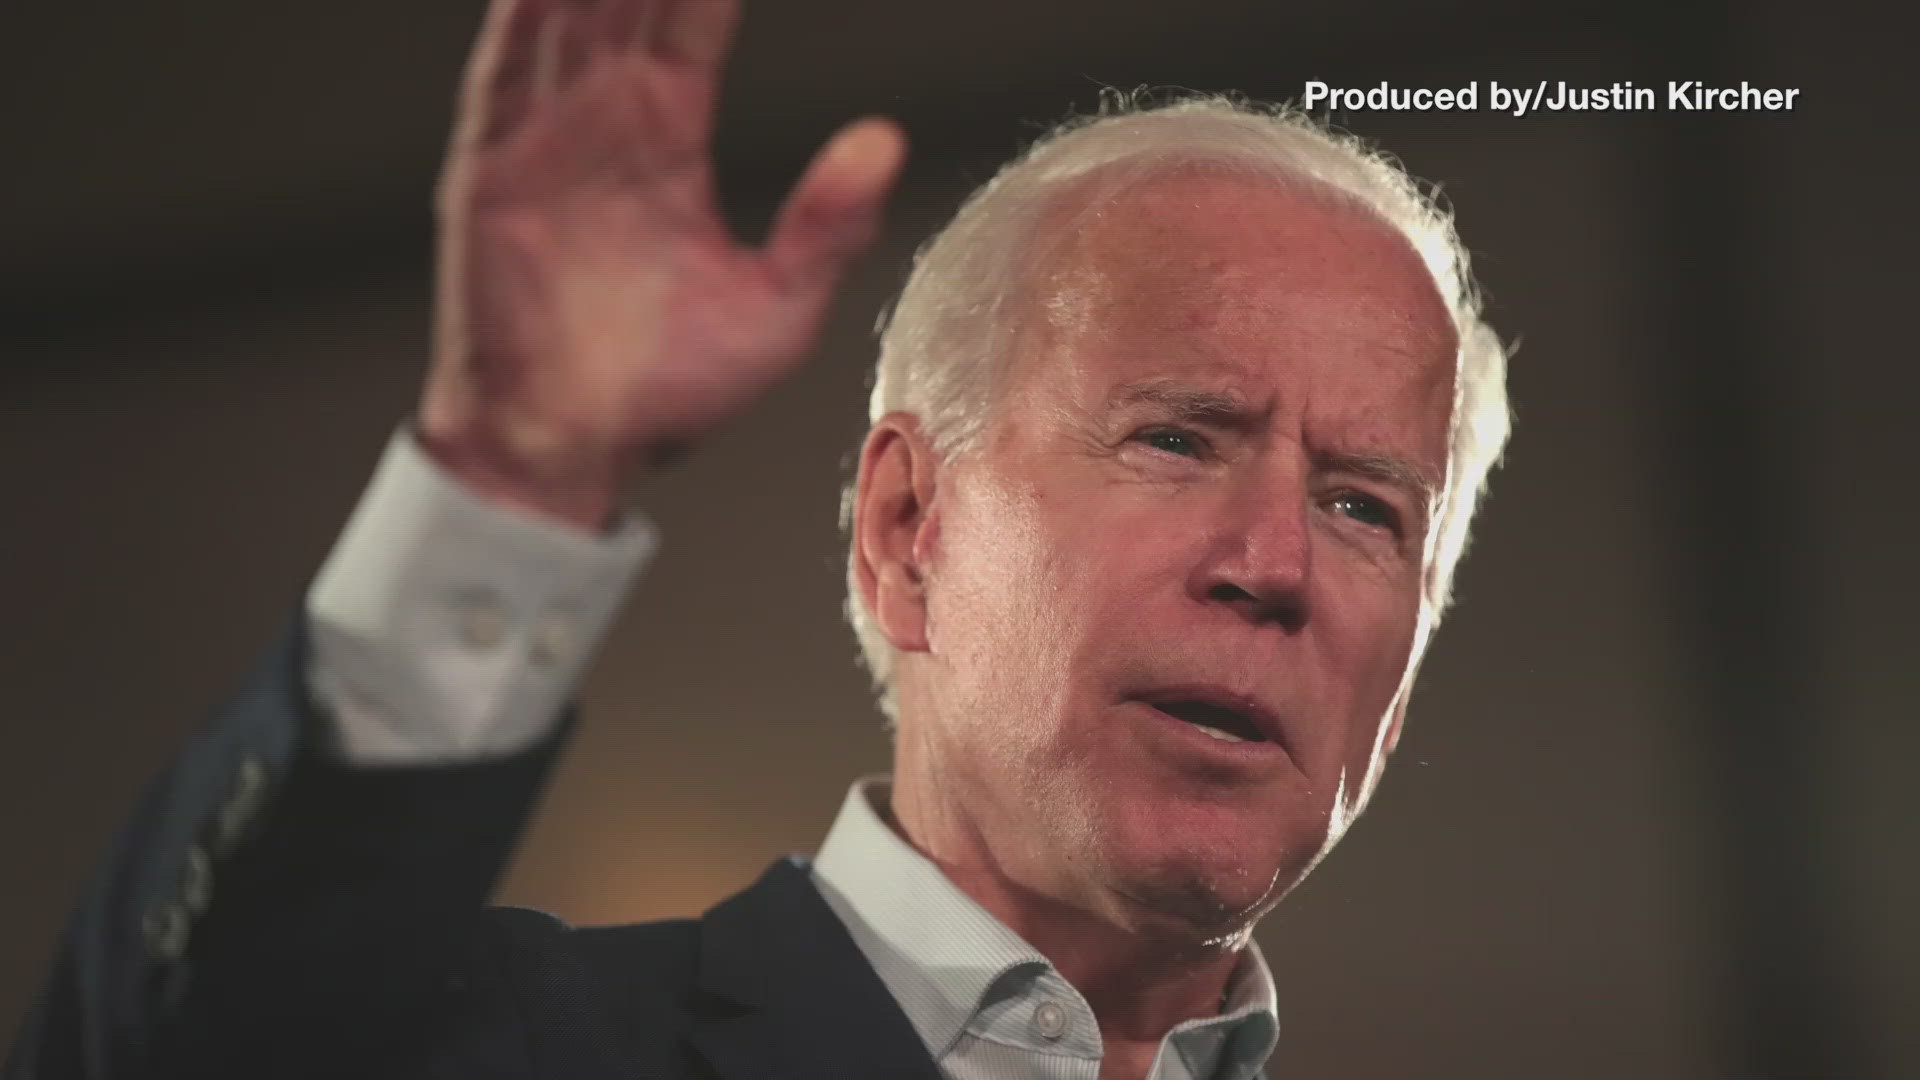 Three months away from the election finds Joe Biden supporters anxious, while President Trump backers are excited about the 2020 campaign. Veuer's Justin Kircher has more.